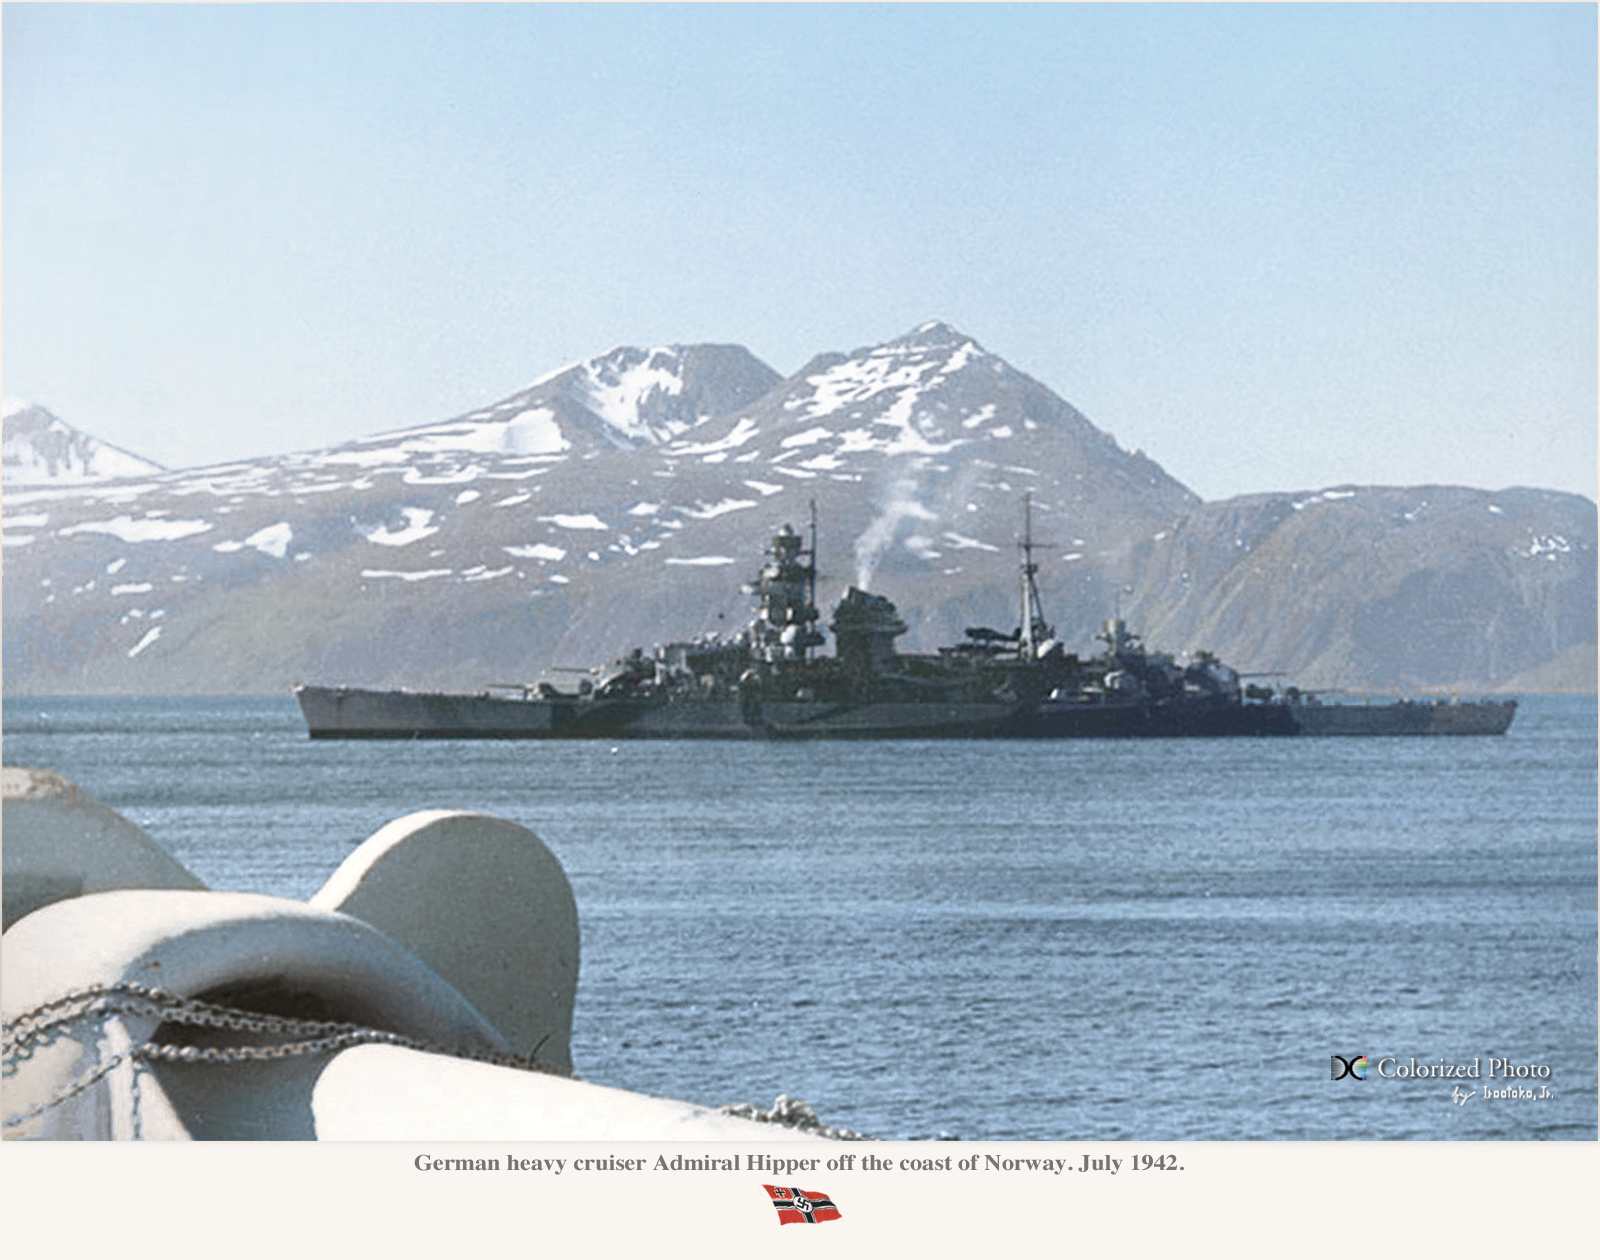 KMS Hipper in Norway, July 1942 - colorized by Irootoko jr